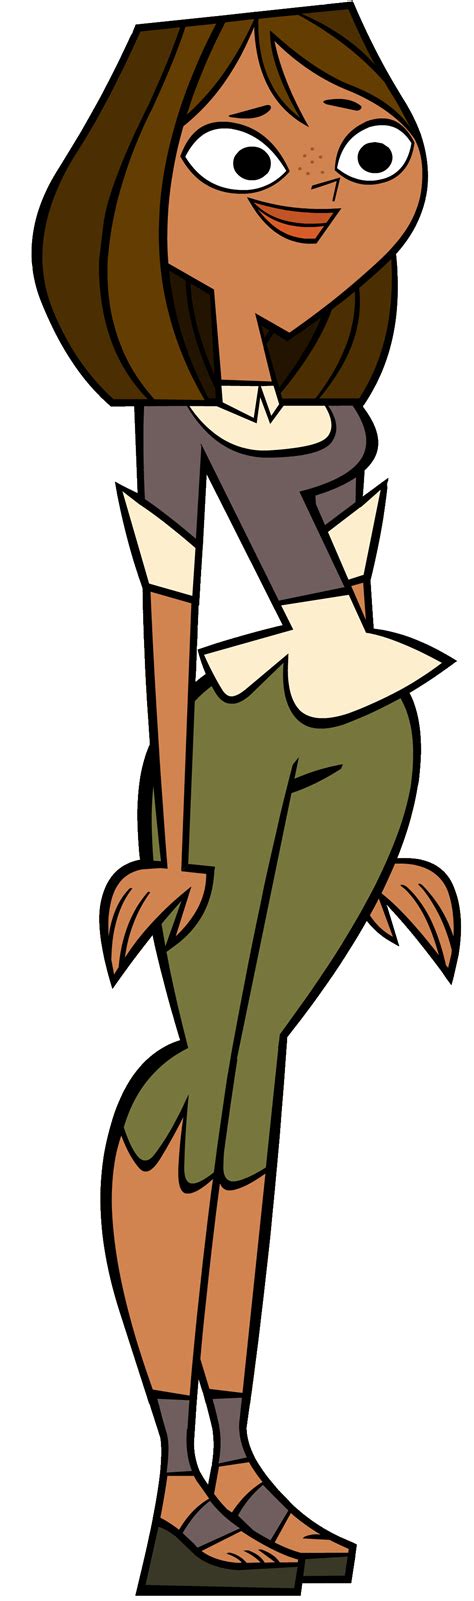 Heather was a camper and the main antagonist of Total Drama Island as a member of the Screaming Gophers. . Tdi courtney